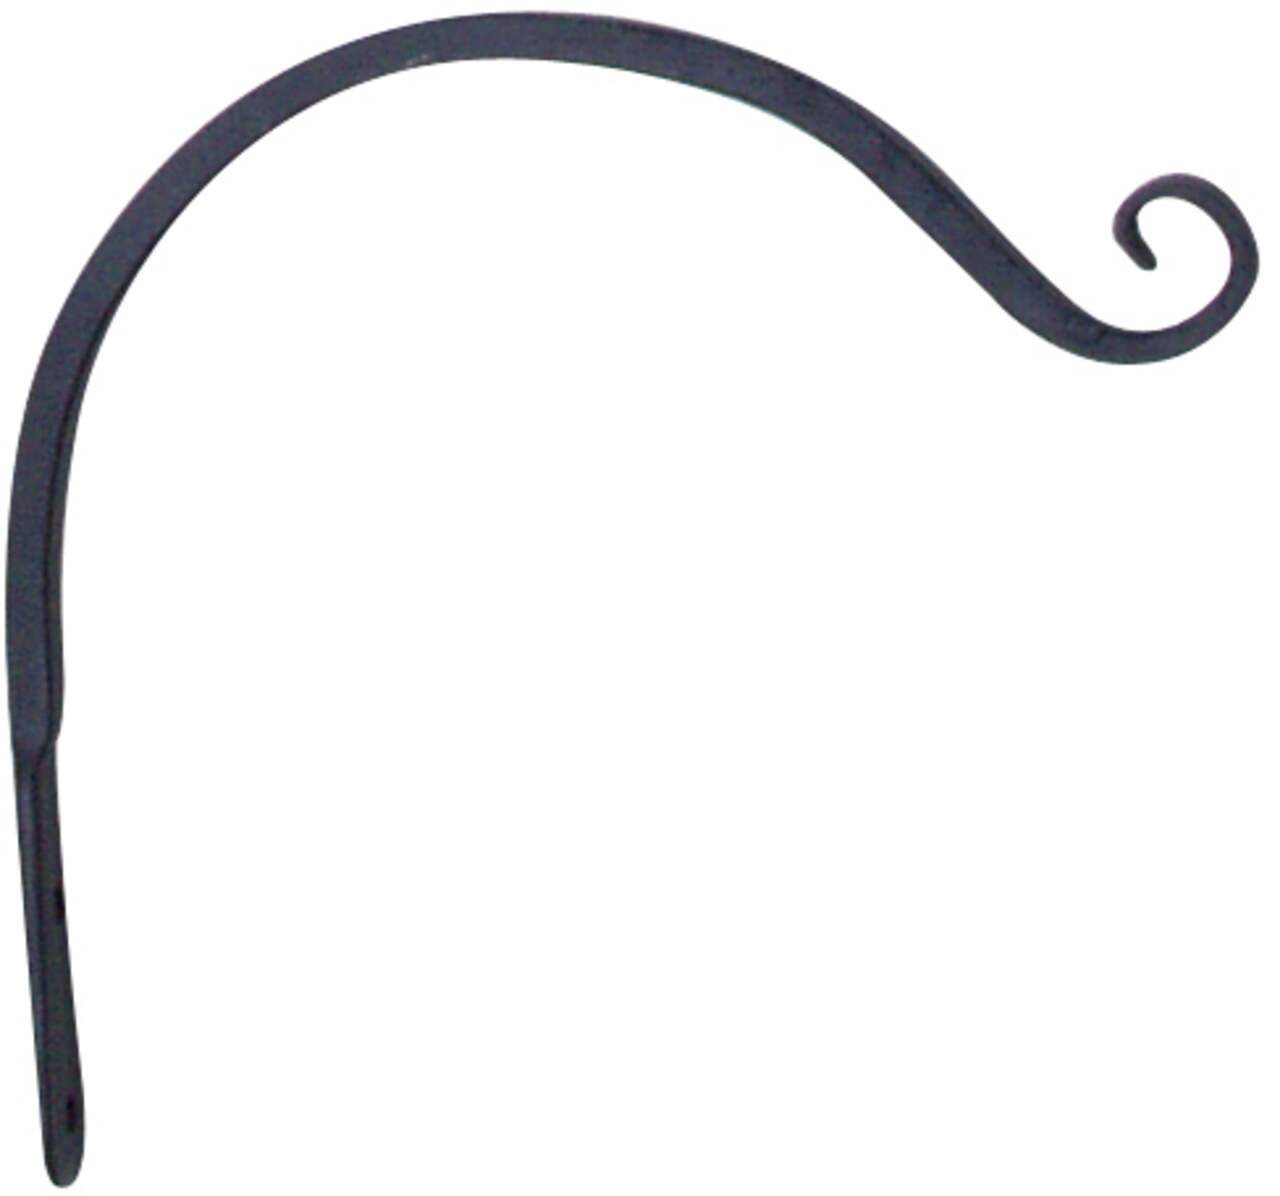 Forged Wall Plant Hook/Bracket For Hanging Basket Planters, 12-in, Black